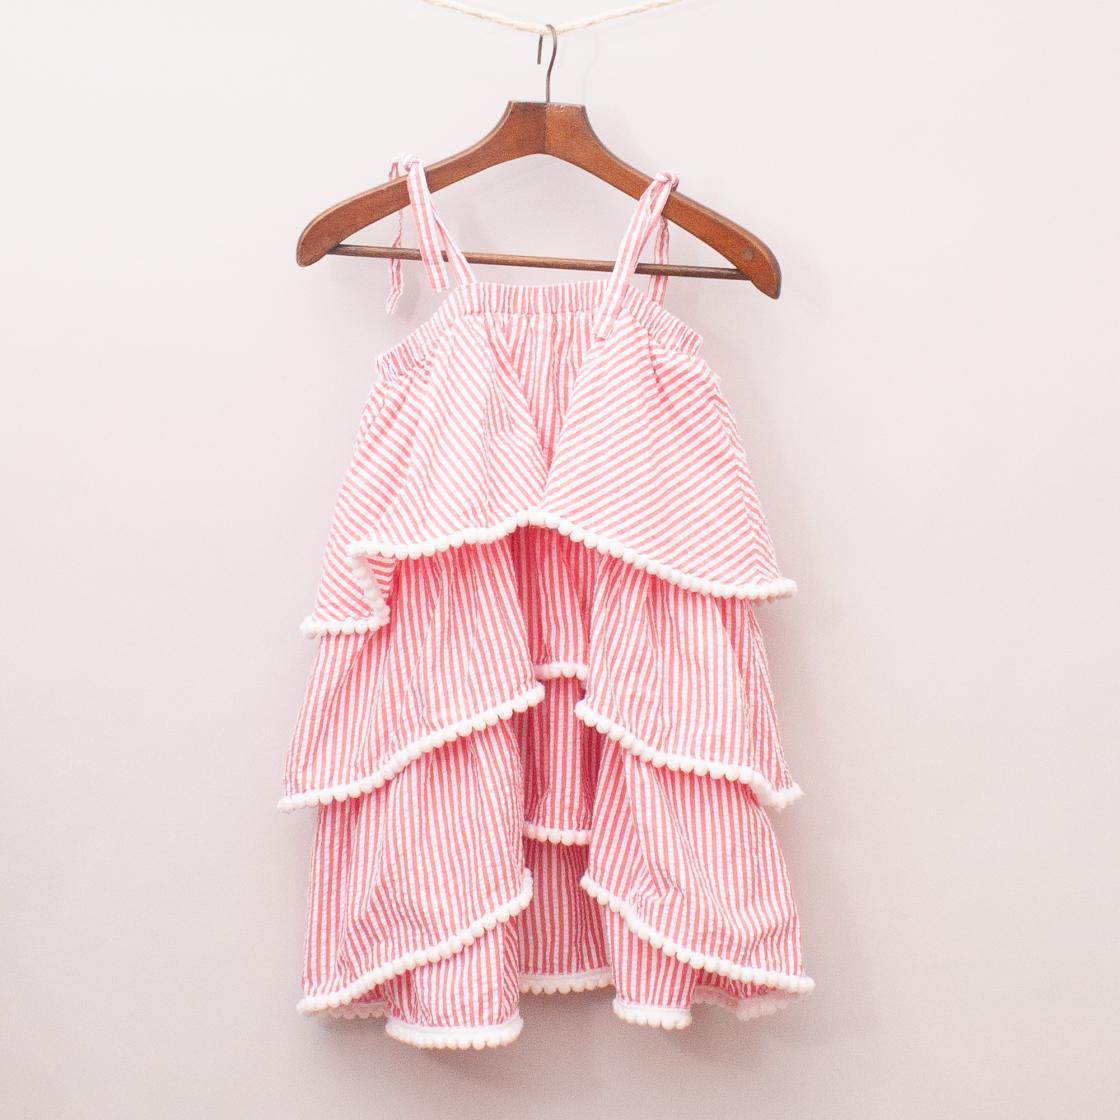 Seed Striped Layer Dress